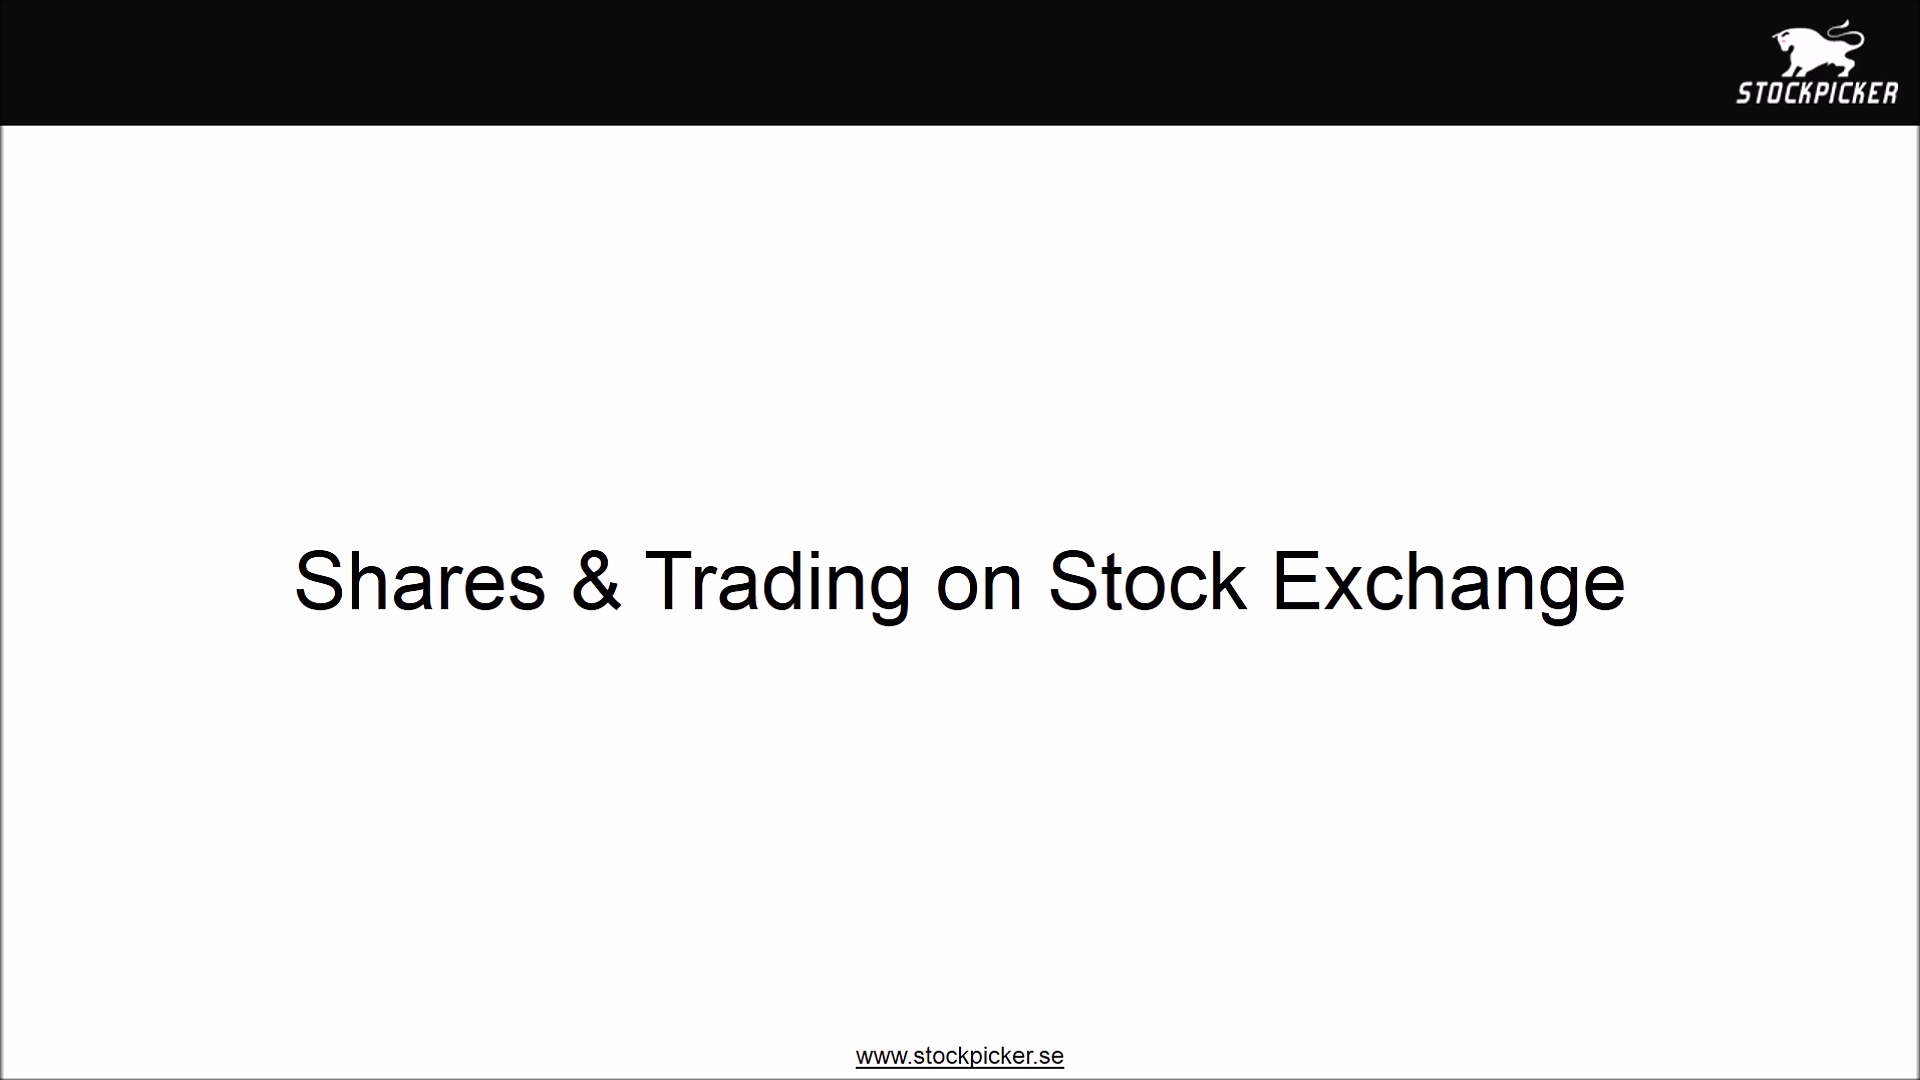 Online Share Trading in Stock Market